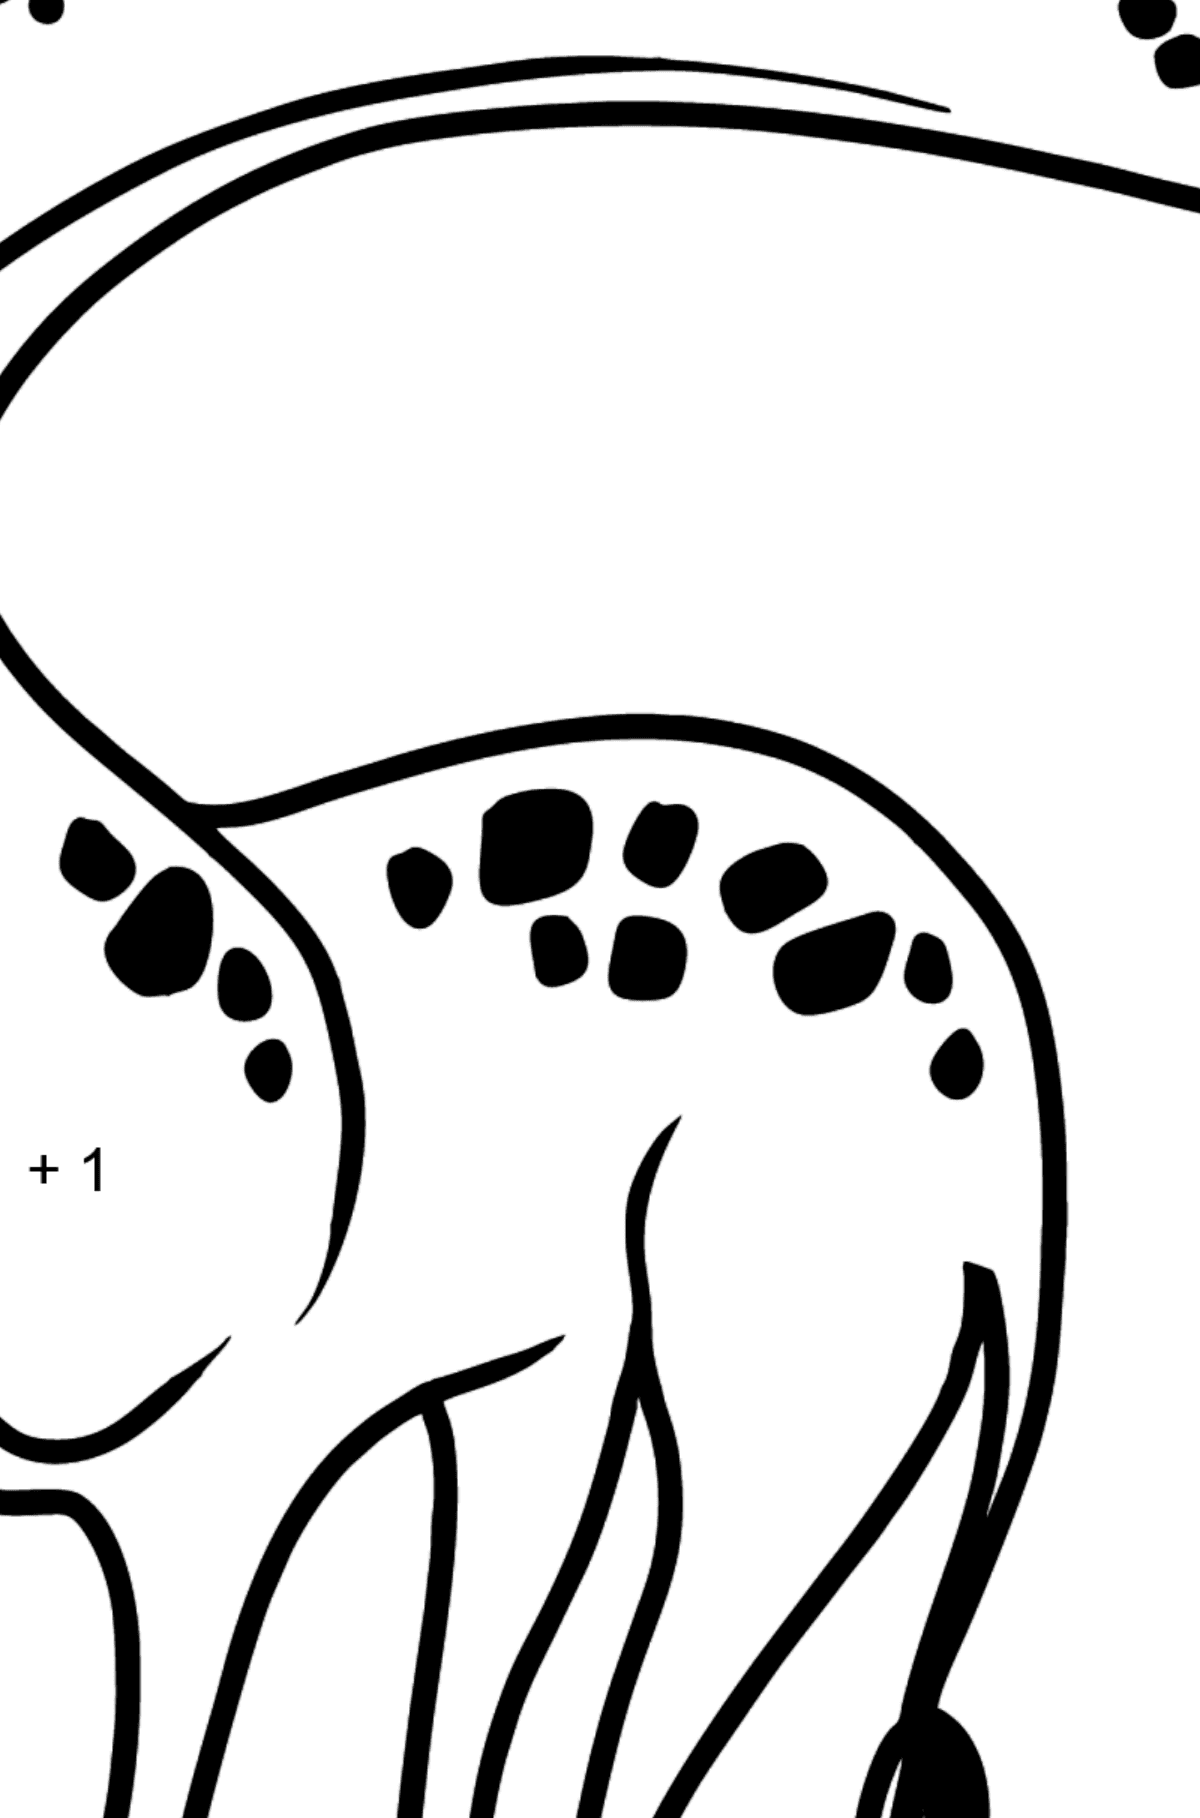 Giraffe coloring page - Math Coloring - Addition for Kids